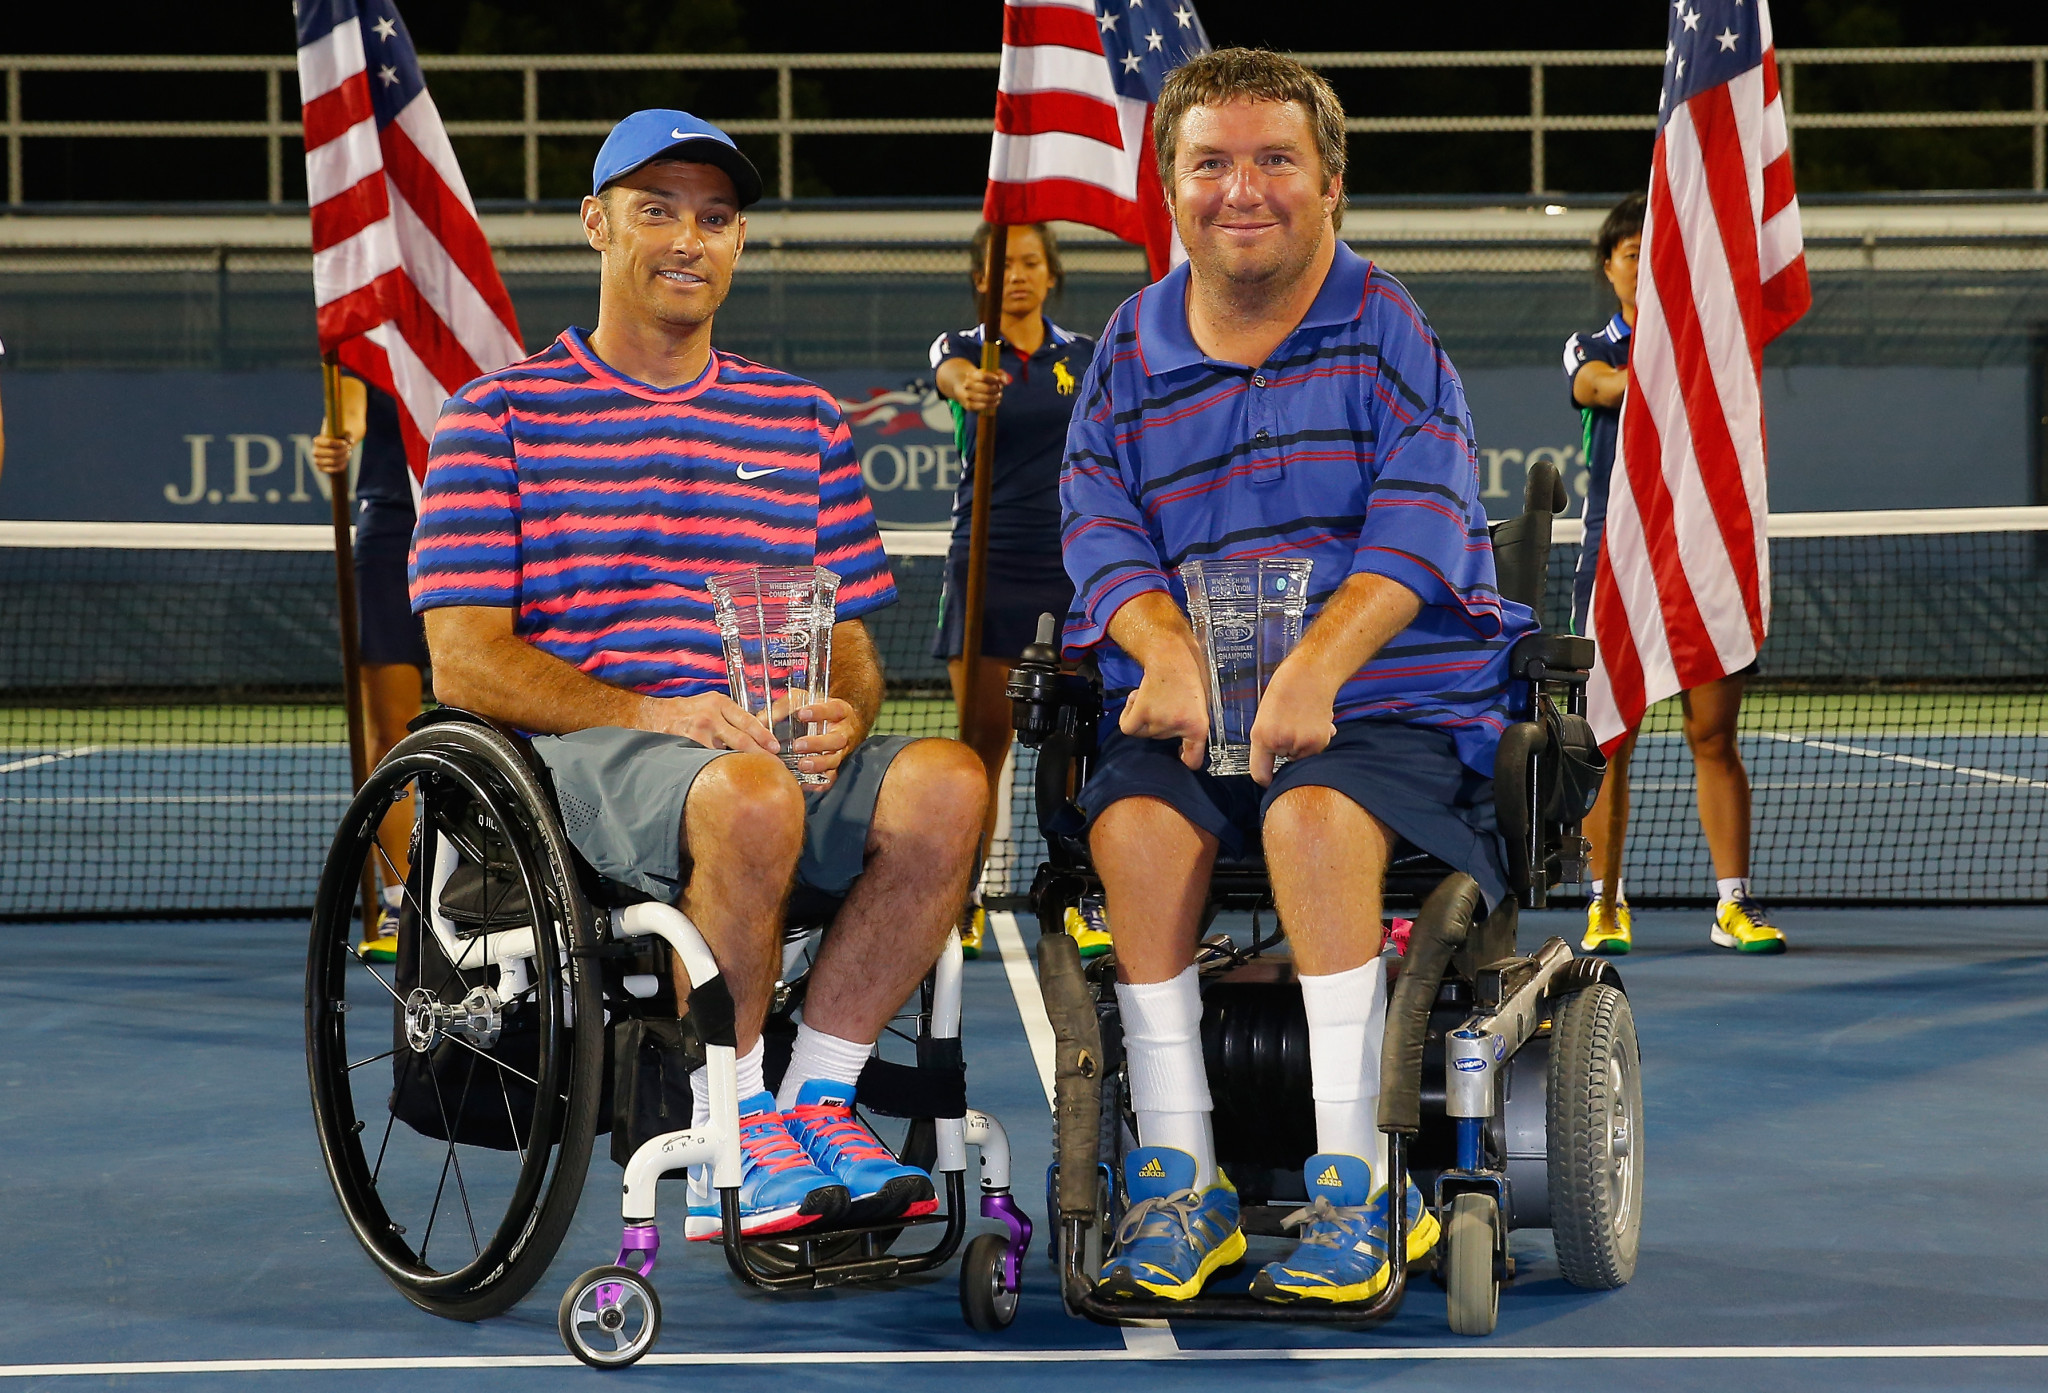 Nick Taylor, right, and fellow American David Wagner have formed a formidable quads doubles partnership in recent years, including winning the UNIQLO Wheelchair Doubles Masters in Bemmel ©Getty Images